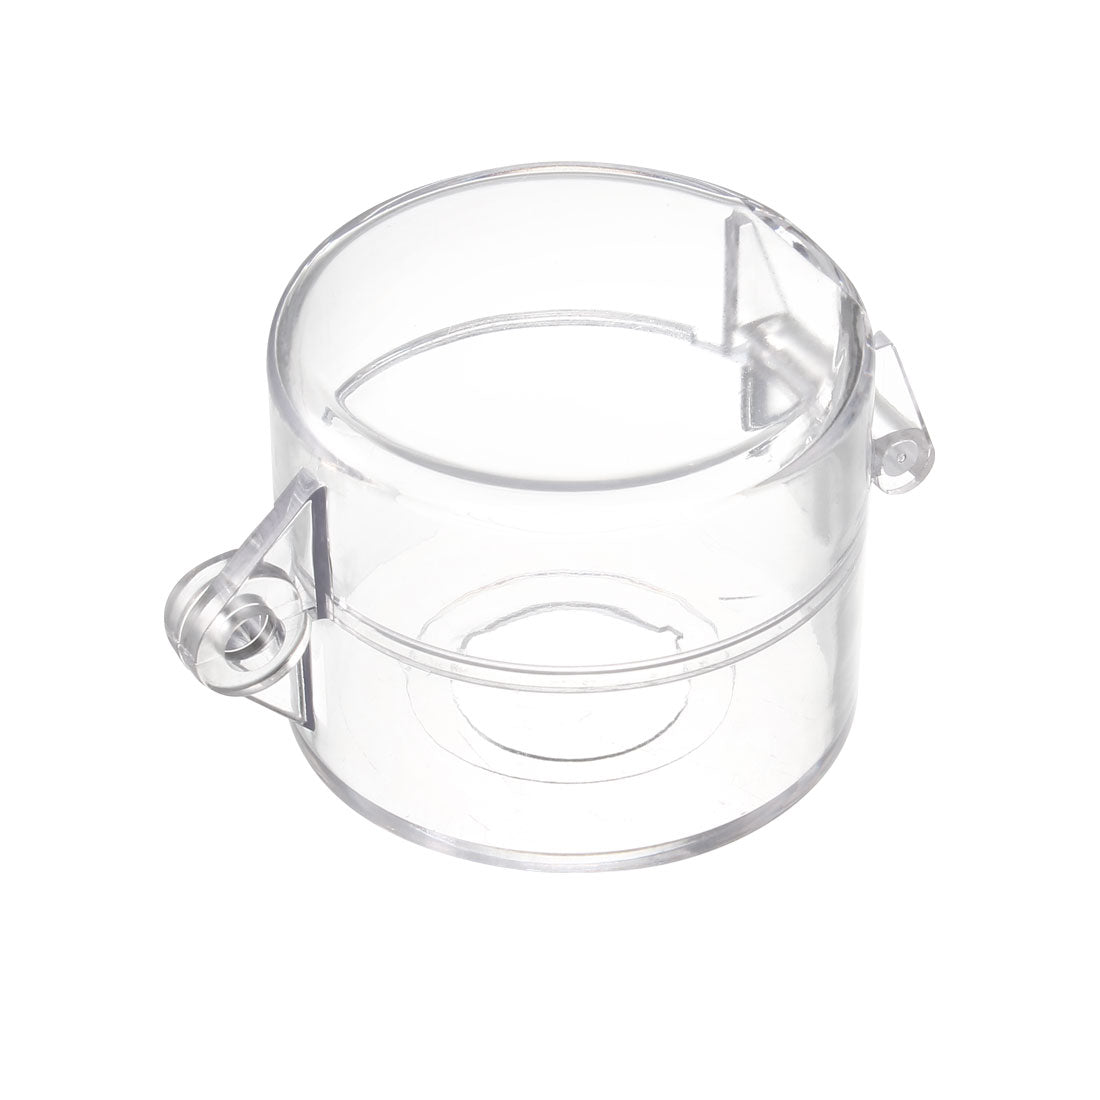 Uxcell Uxcell 1pcs Clear Plasatic Switch Cover Protector for 30mm Diameter Push Button Switch 55*43